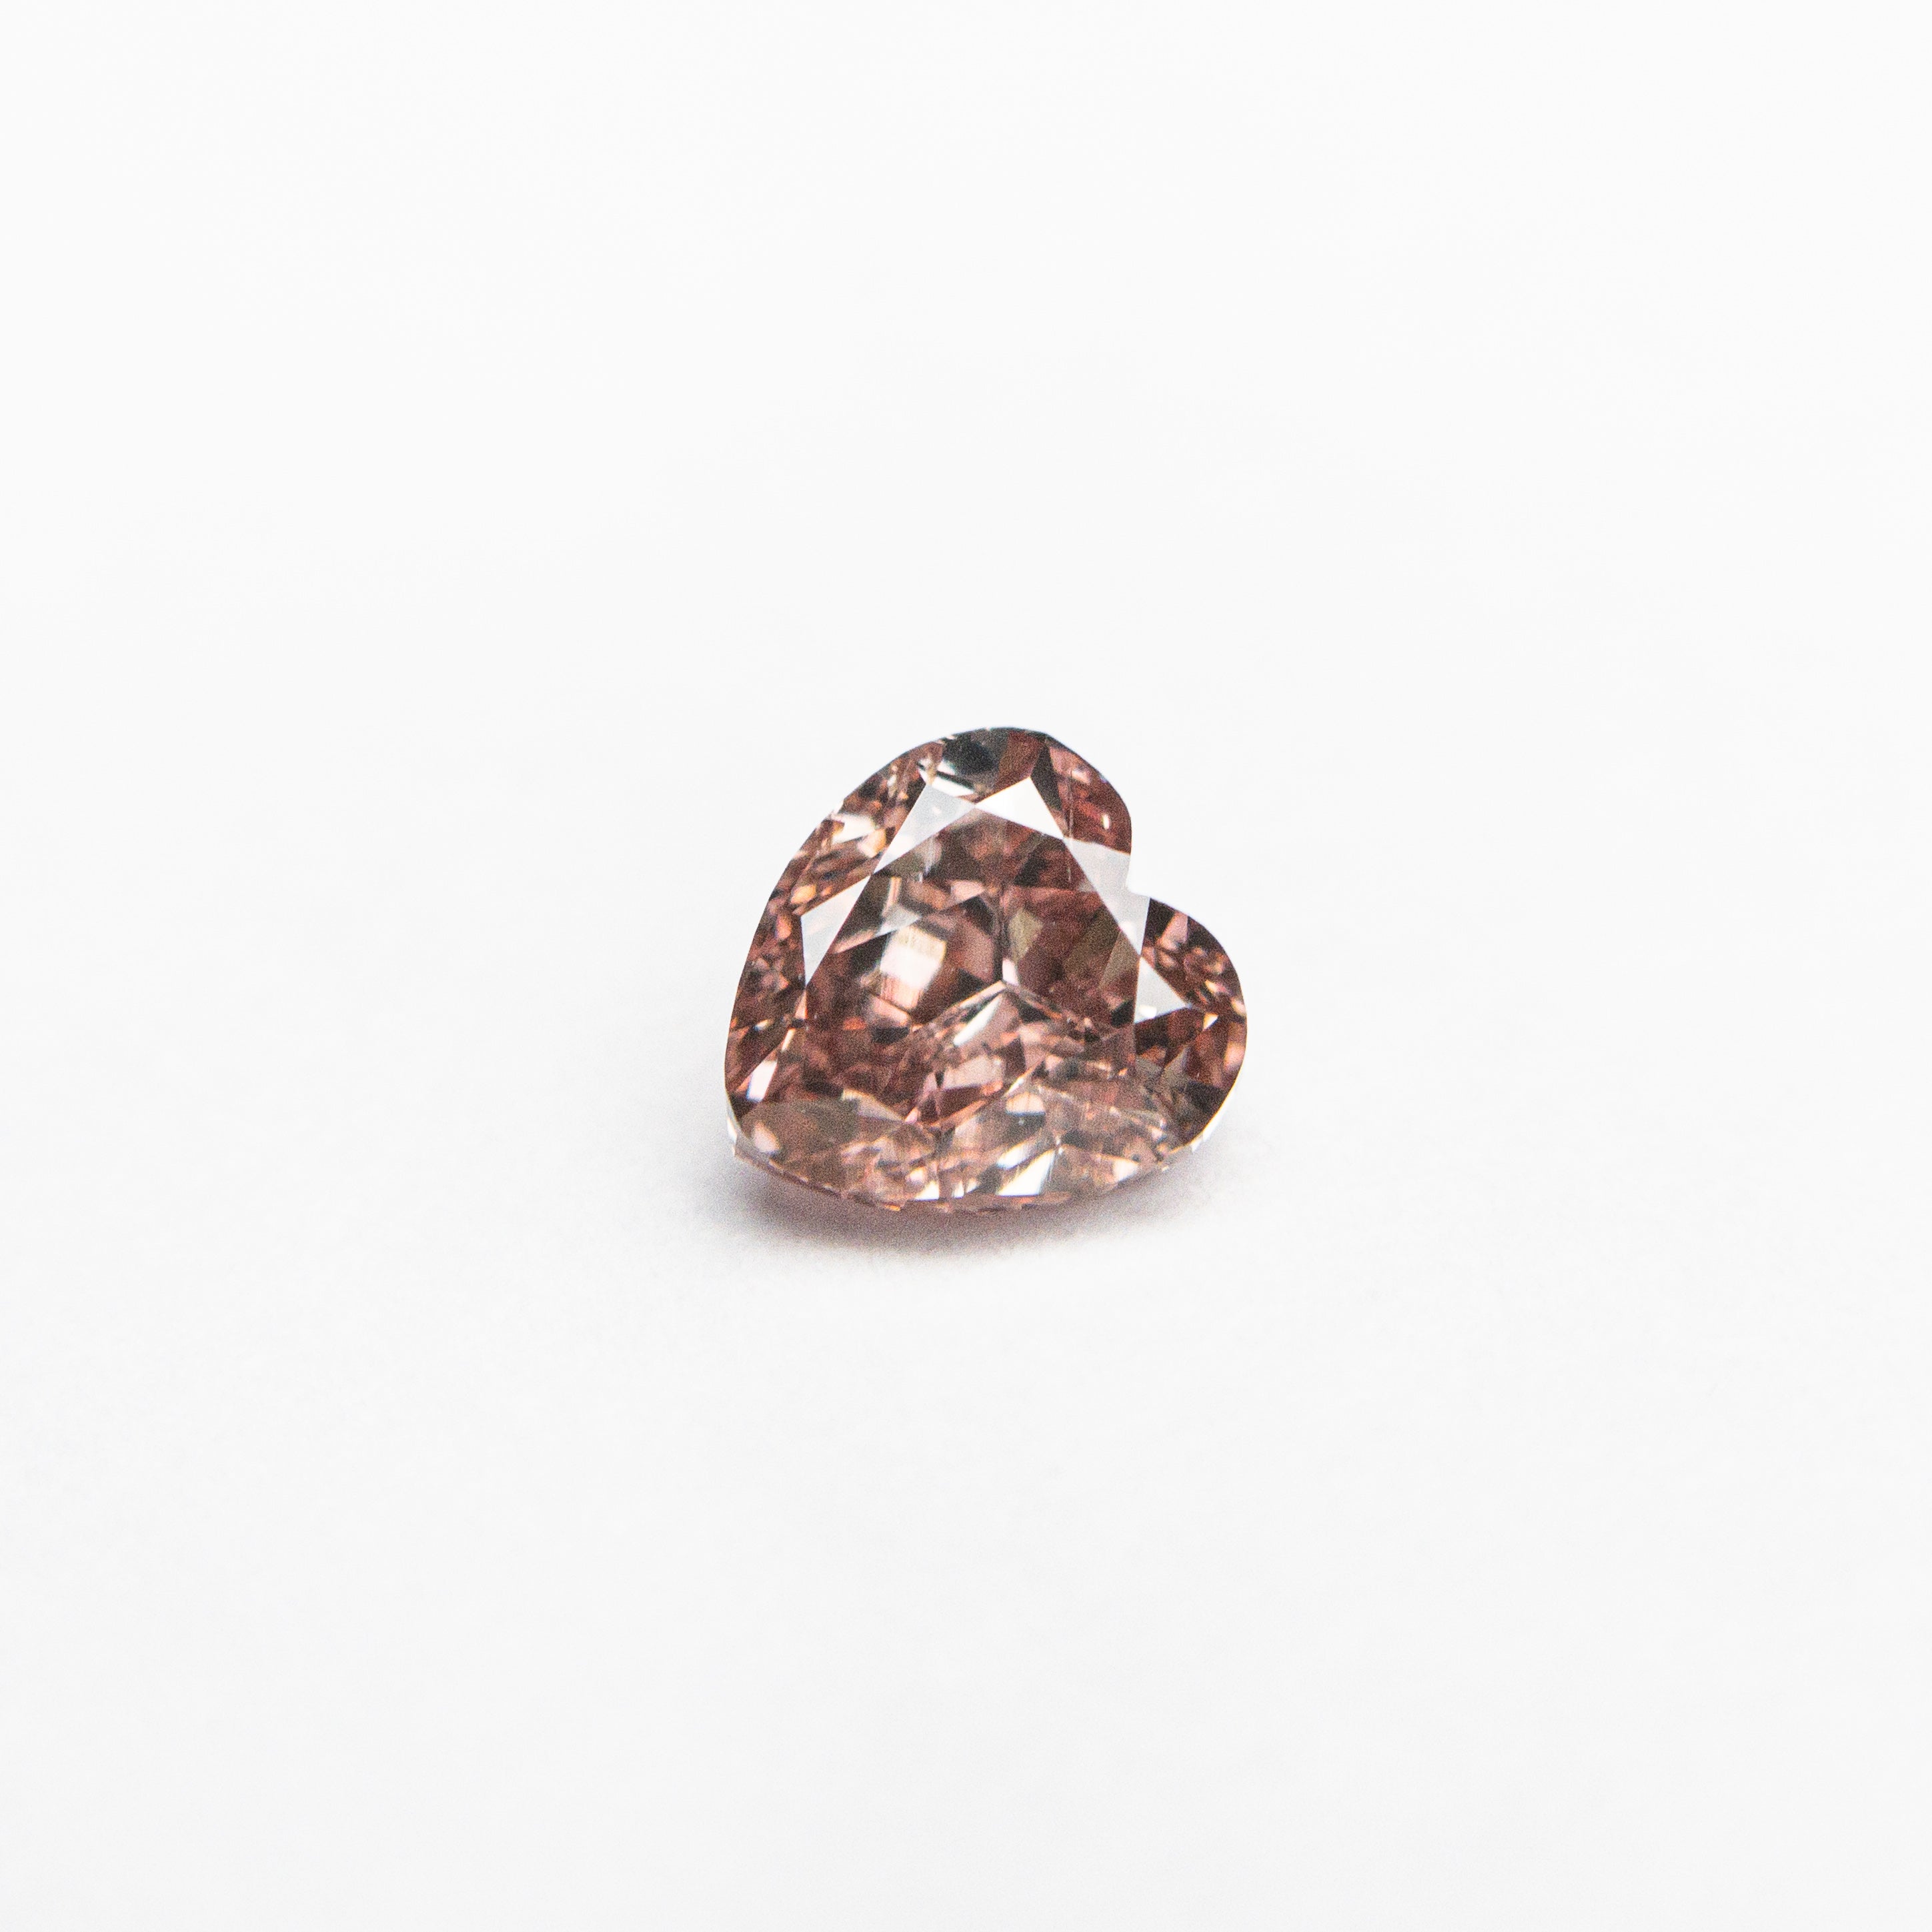 0.30ct 4.16x3.94x2.43mm GIA SI2 Fancy Deep Orangy Pink Heart Brilliant 🇦🇺 24122-01